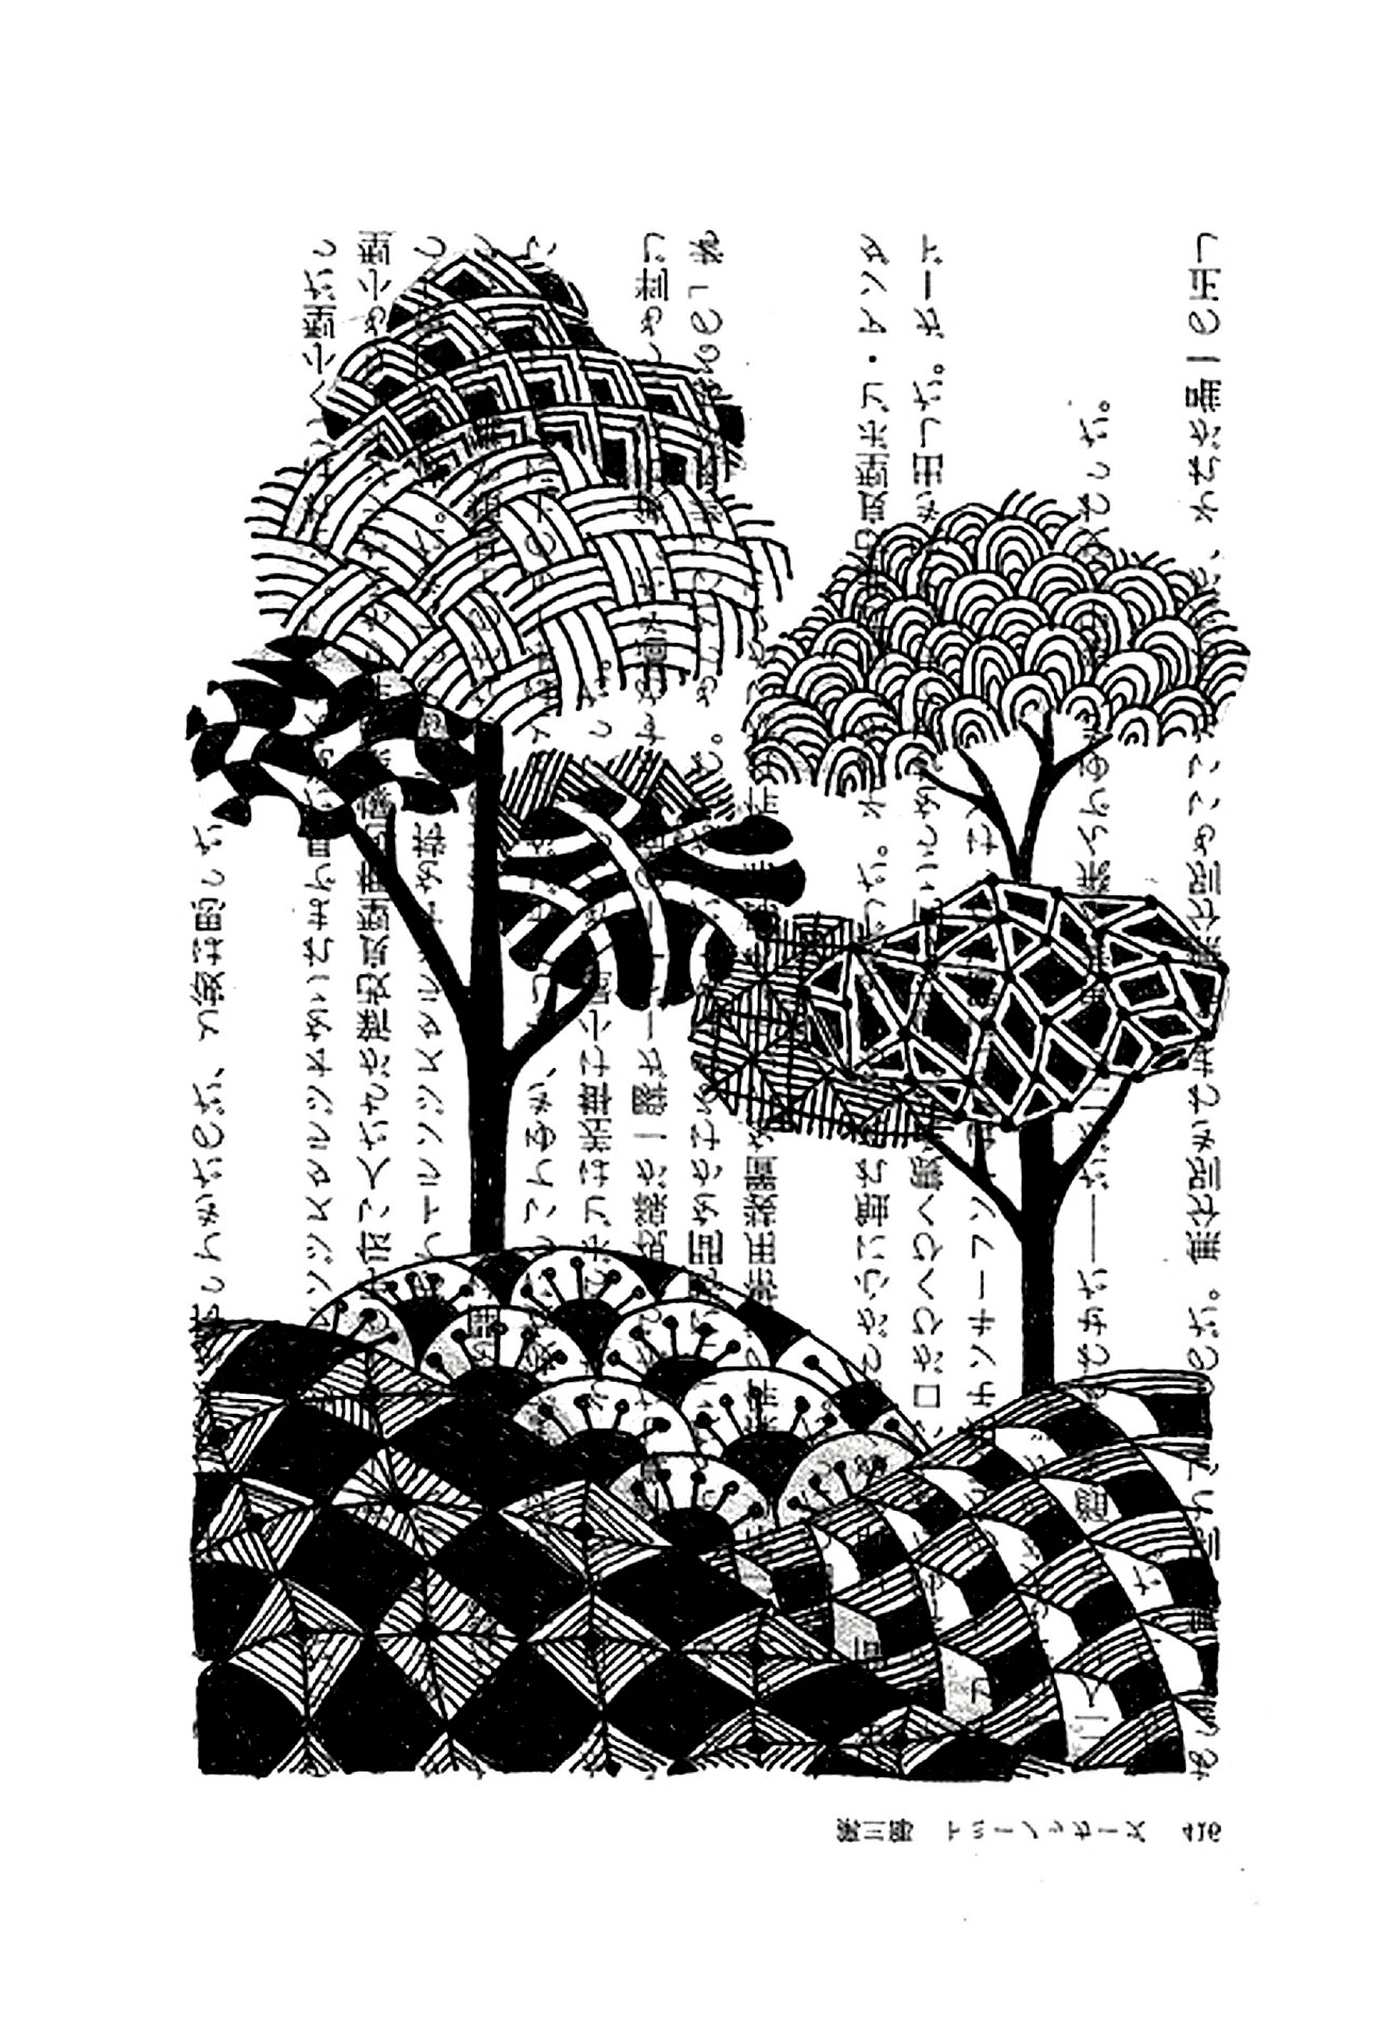  Trees with Japanese writings 